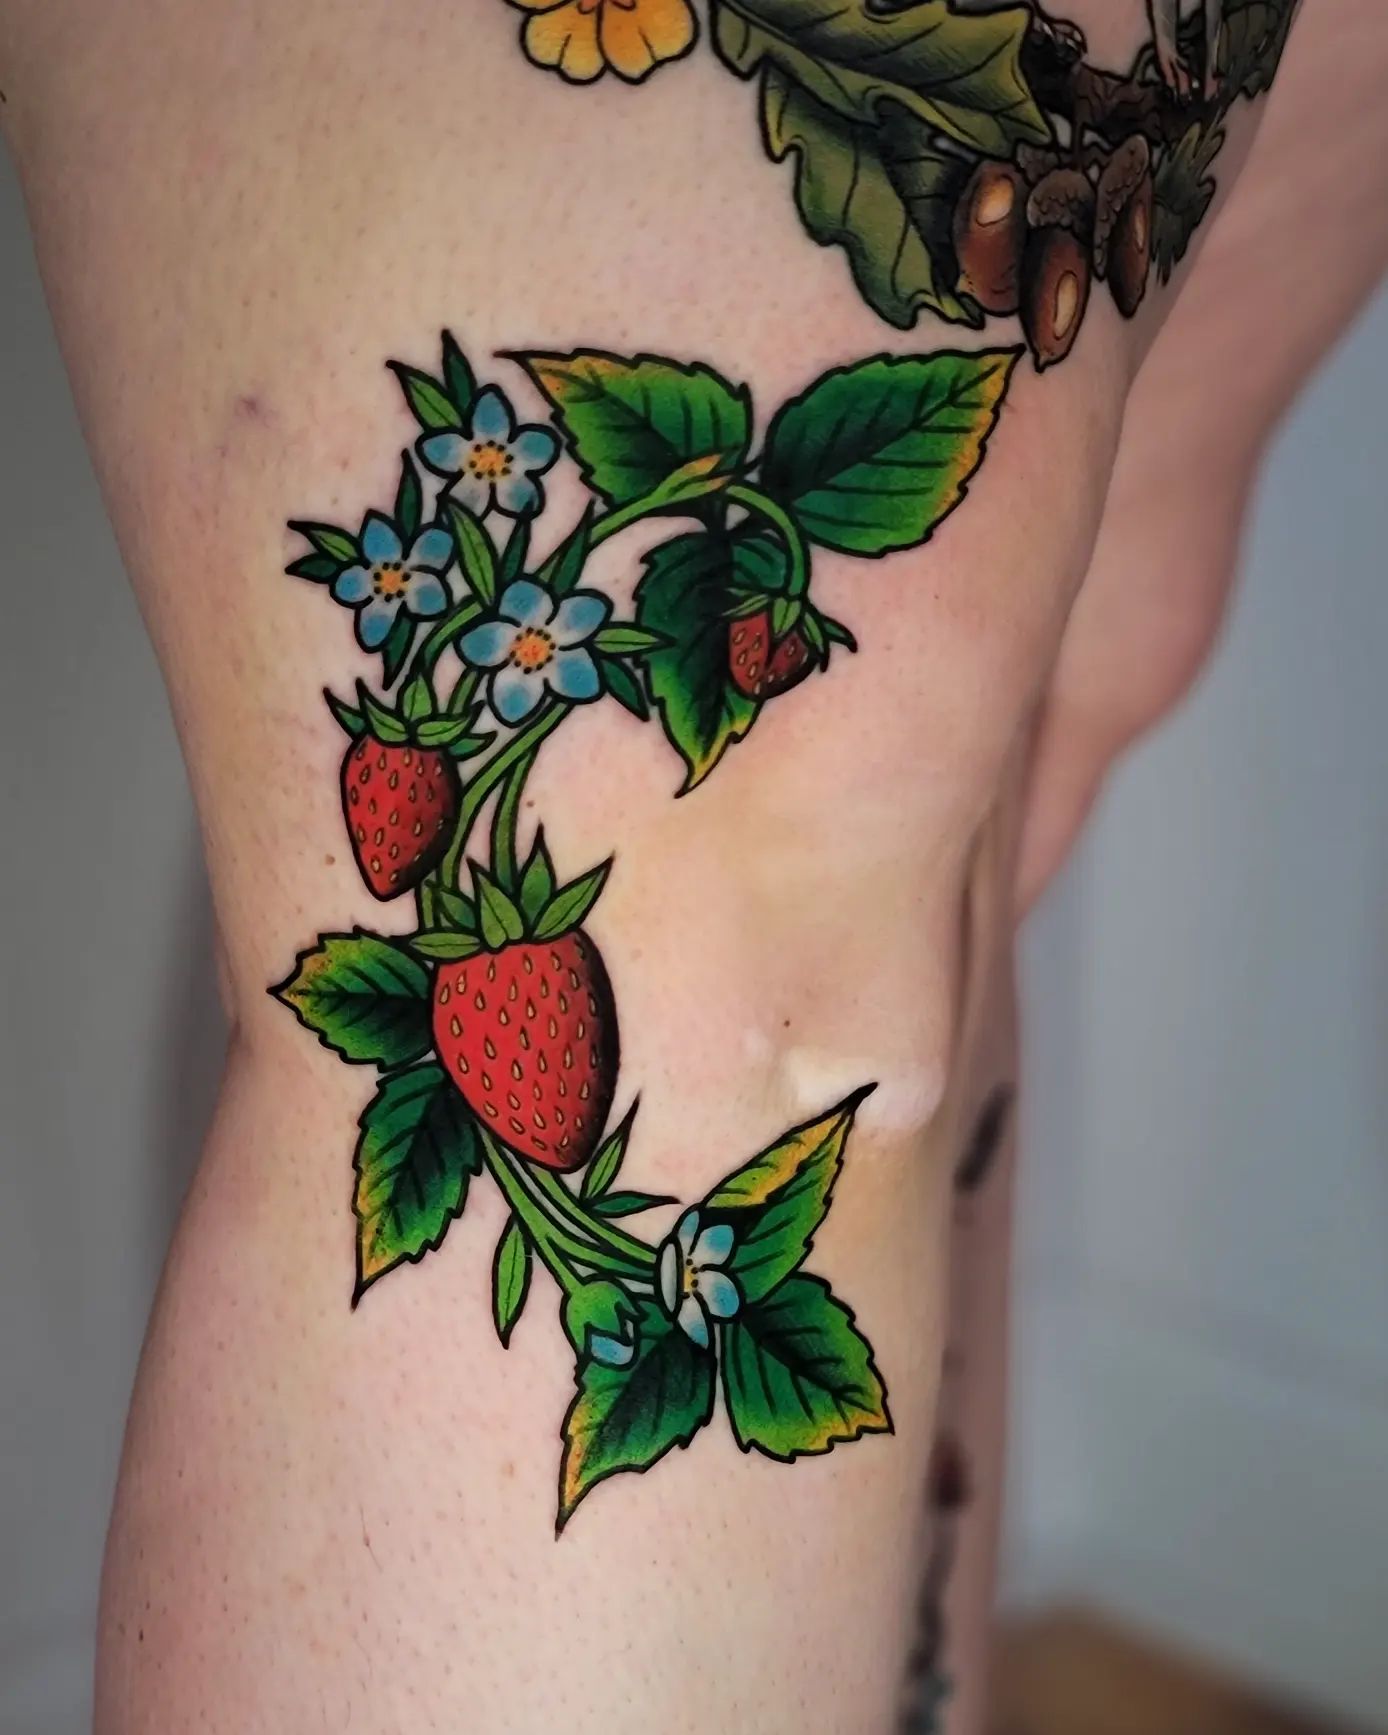 Fruits are a symbol of life. This red and green tattoo can take 3-4 hours to do. Do you like nature and sweets? Are you close to your inner self, as well as Mother Nature? If the answer is yes, this tattoo is the right one for you.